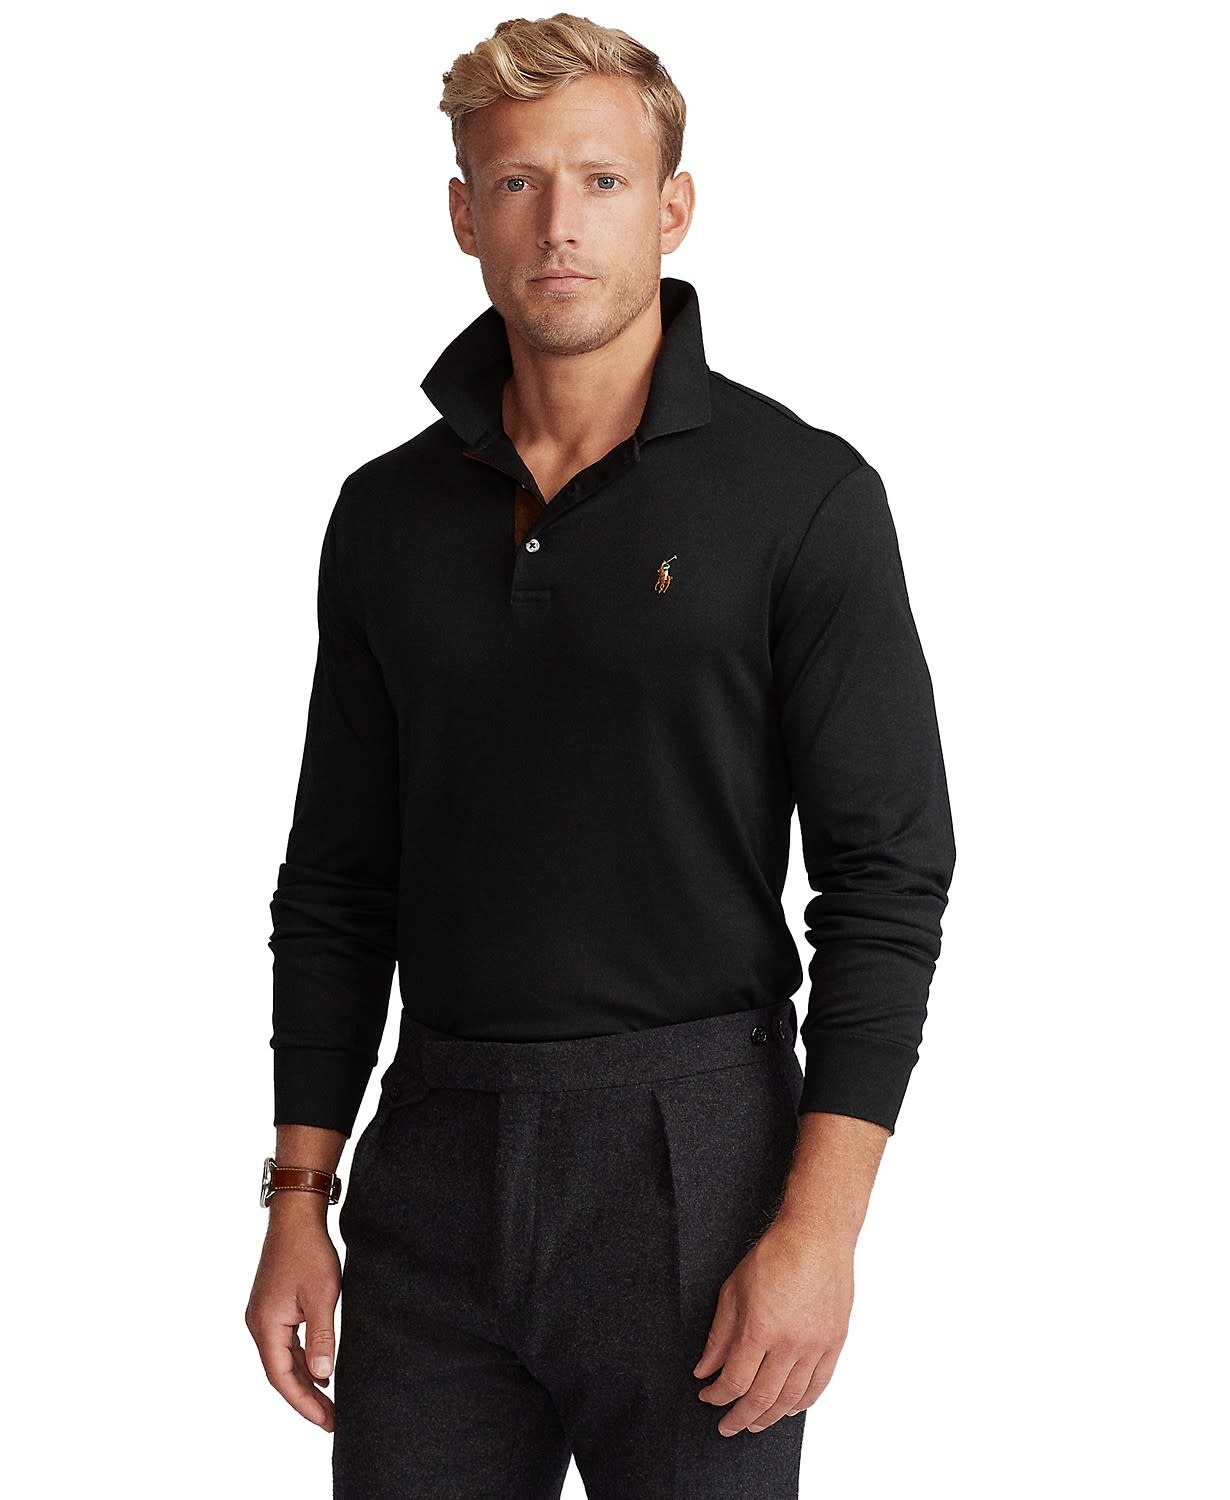 PRL Pima Soft Touch Long Sleeve Polo Shirt - Abraham's